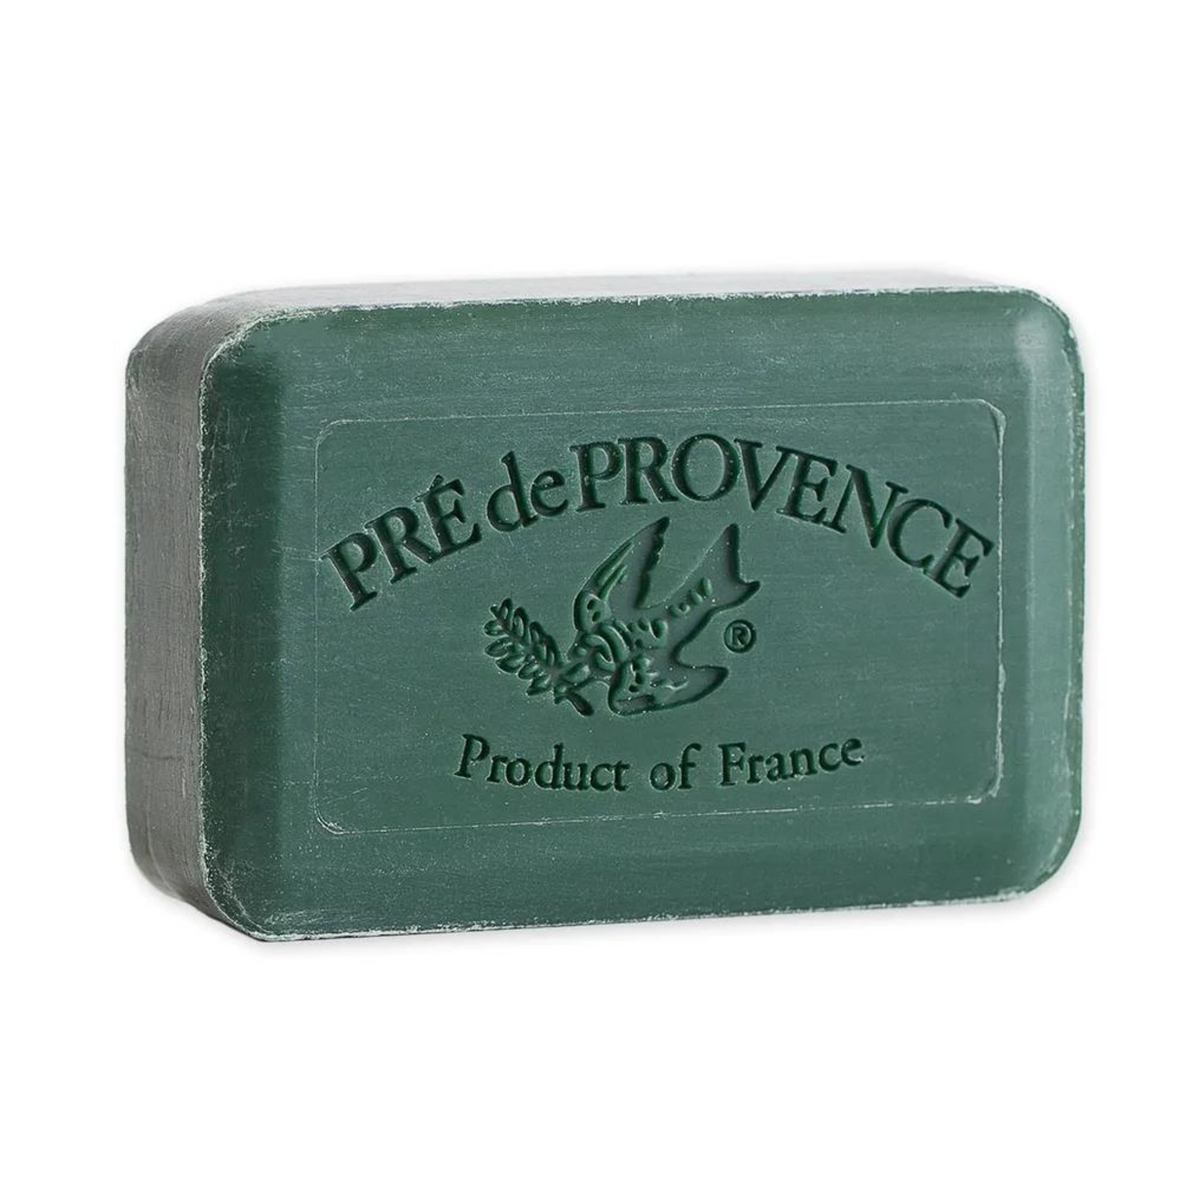 Primary Image of Pre de Provence Noble Fir Soap (250 g)